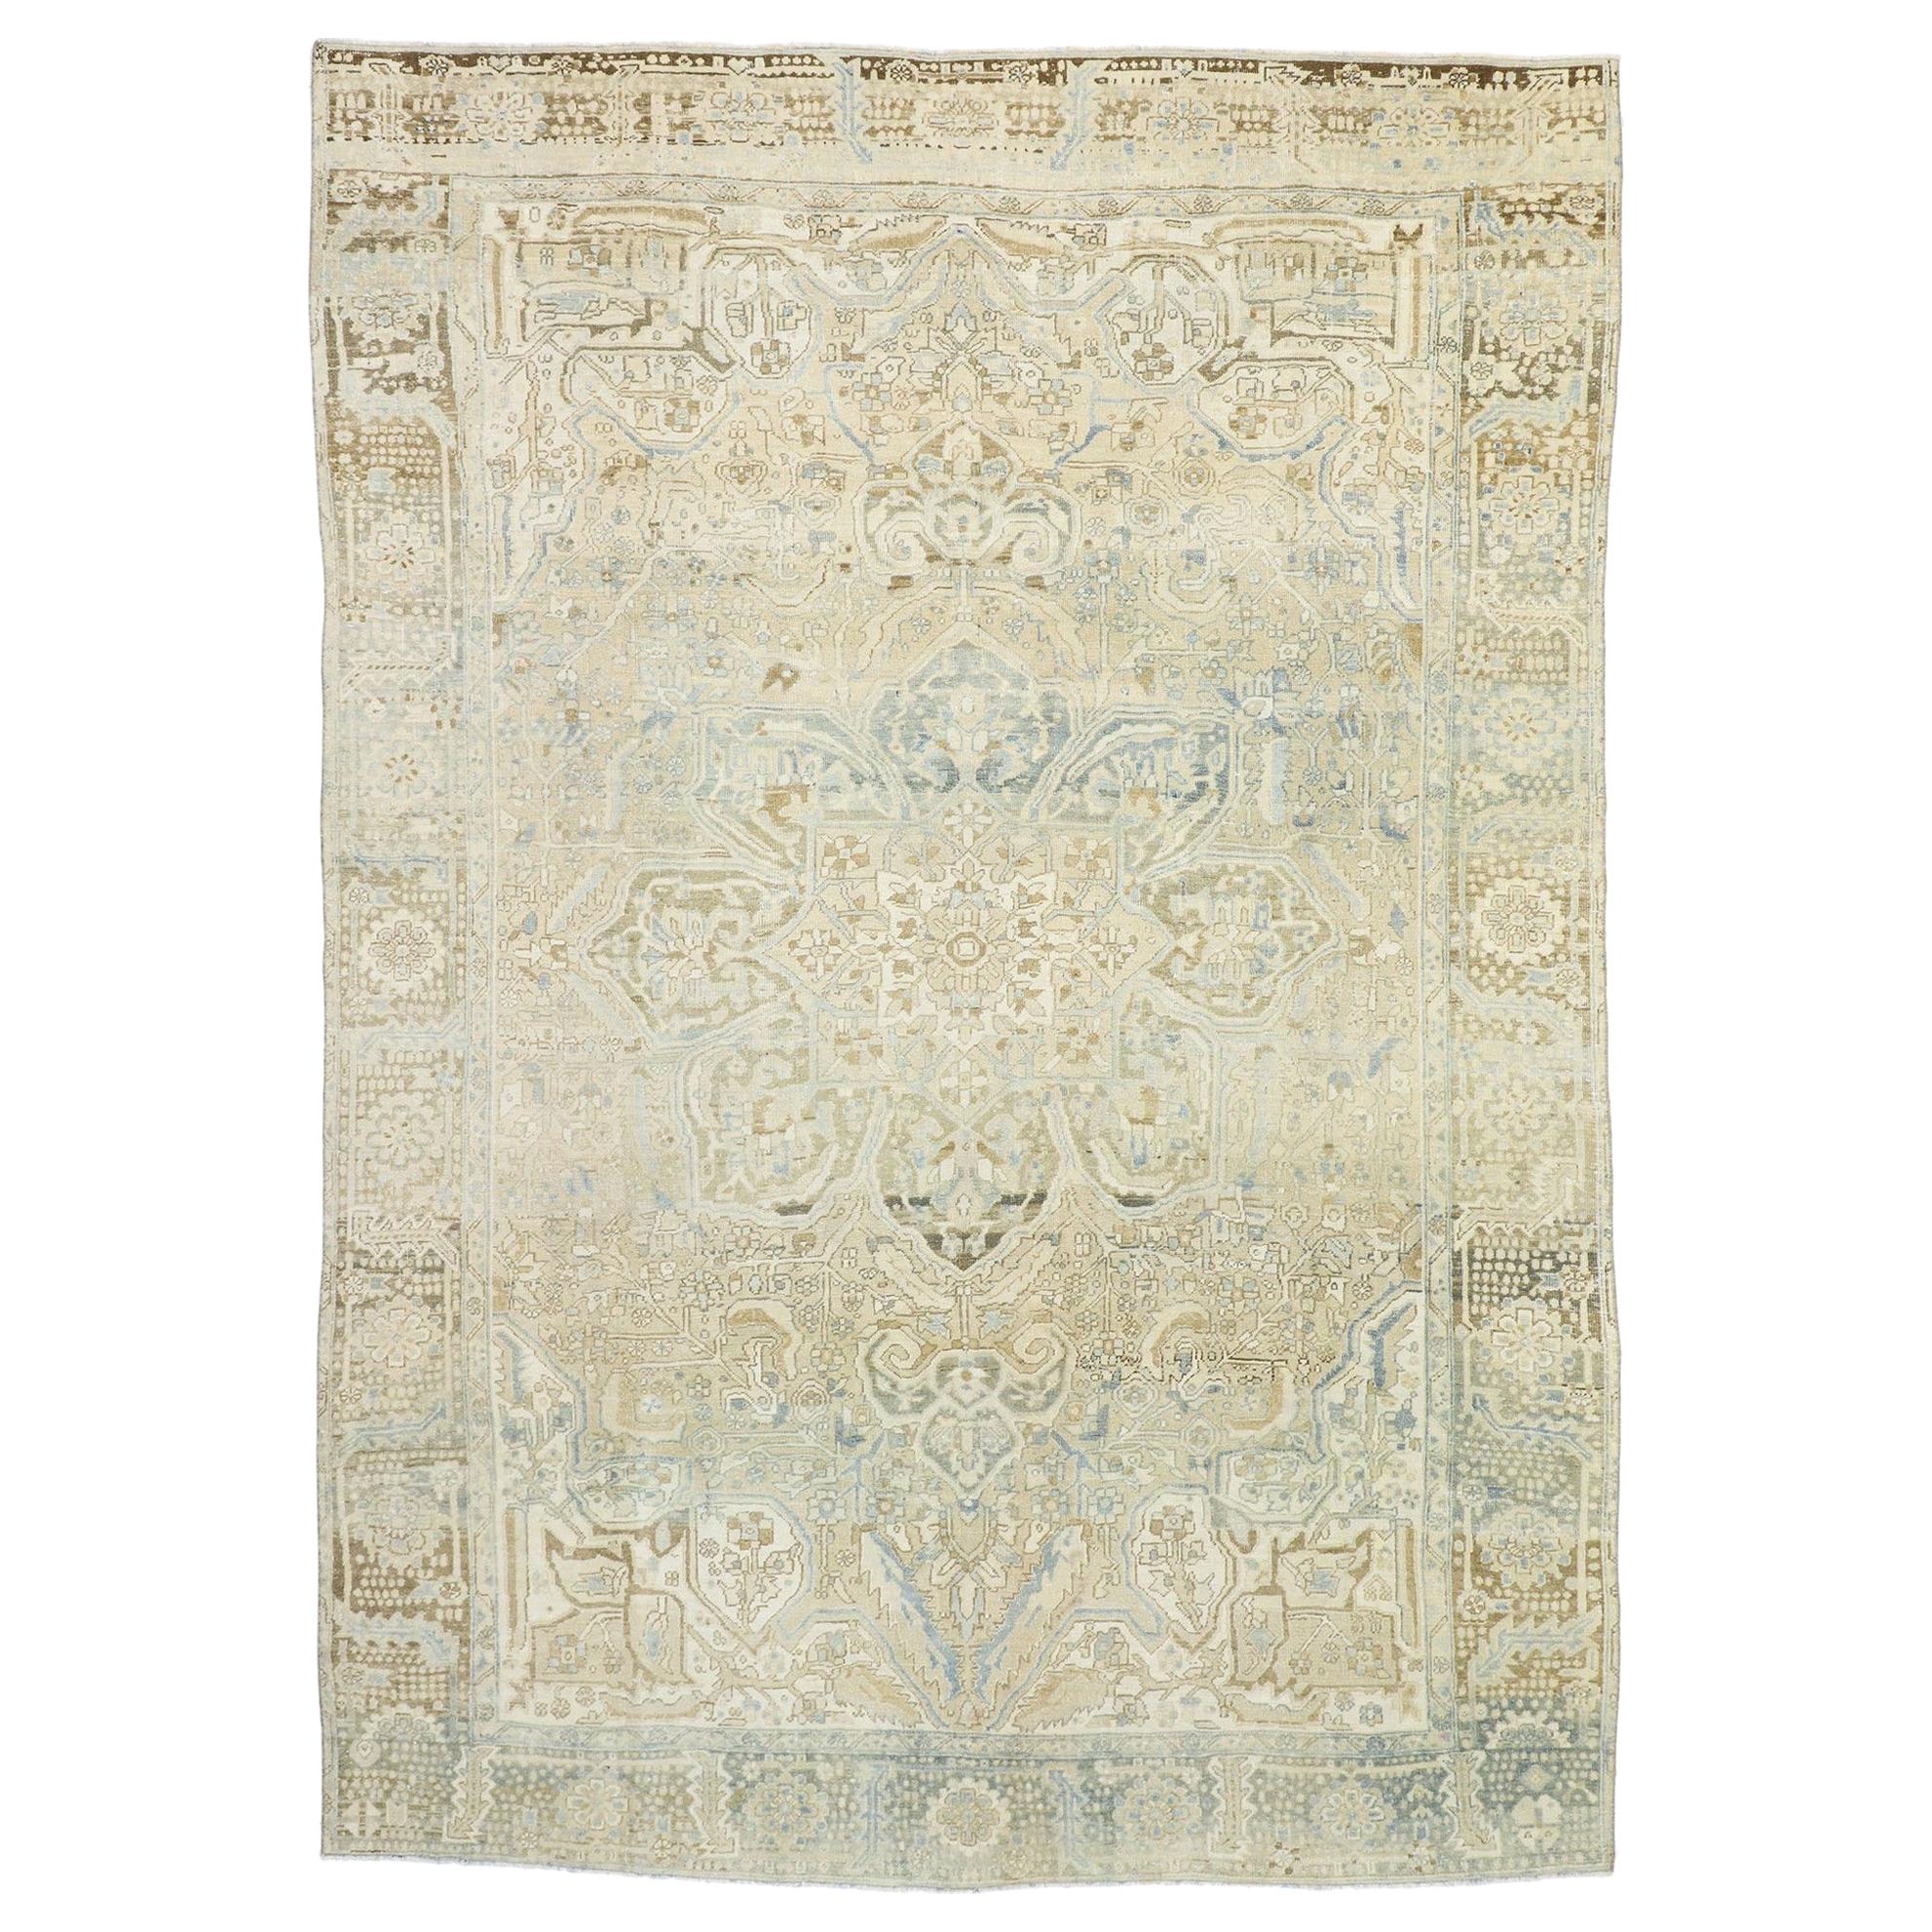 Distressed Vintage Persian Heriz Design Rug with Rustic English Manor Style